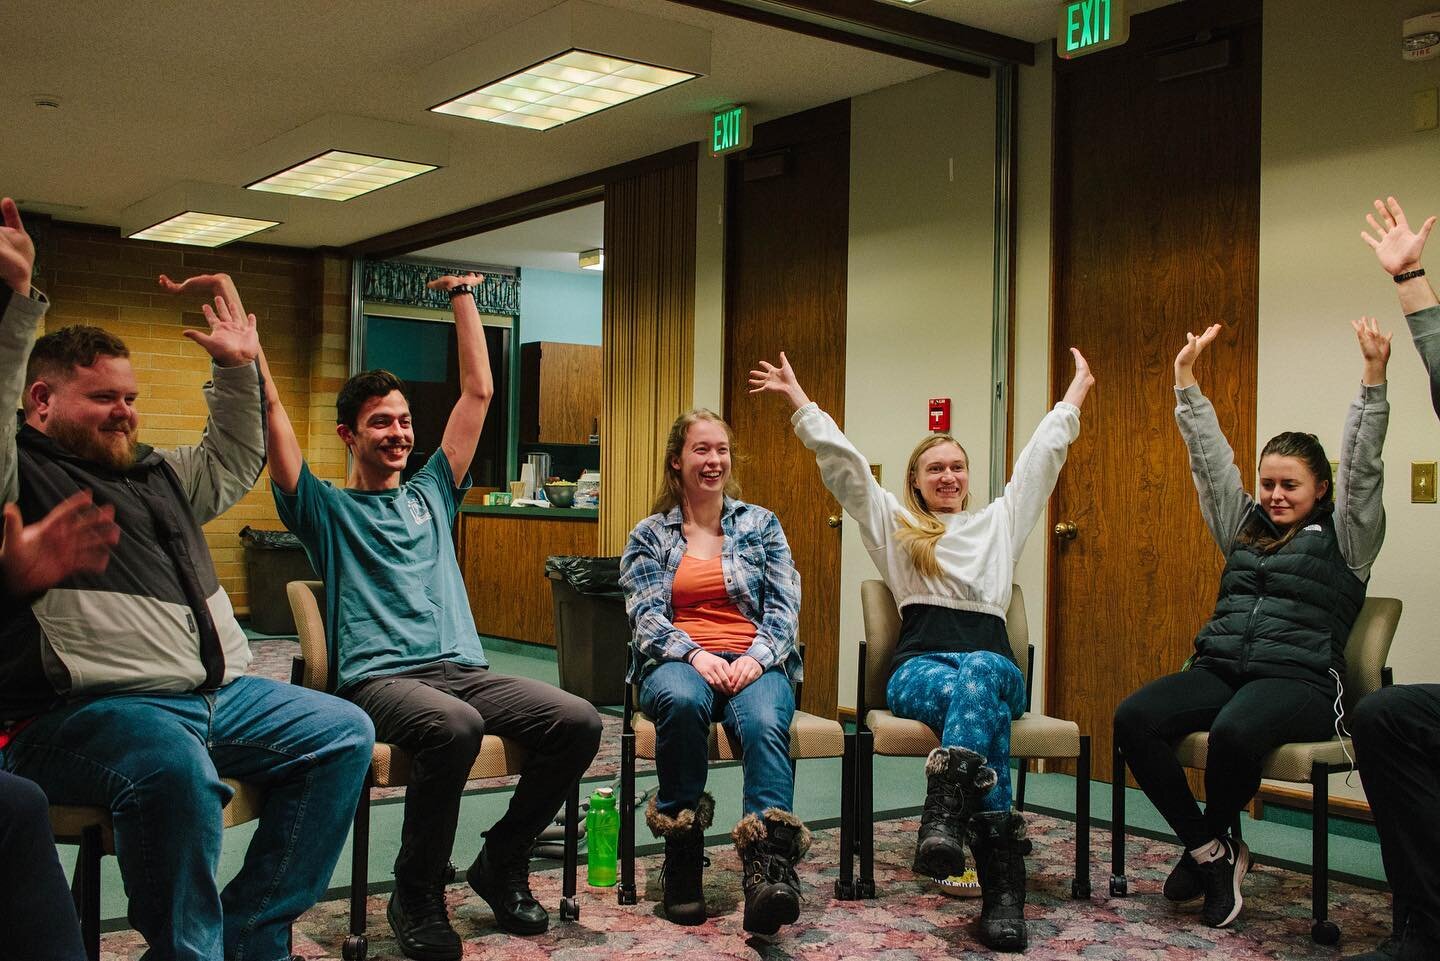 Raise your hands if you had a blast at our game night last Saturday! 🙌 We had so much fun hanging out with everyone! View and download photos from this event at convergewallawalla.smugmug.com. 

Don&rsquo;t forget about our next event, Snow Day at A